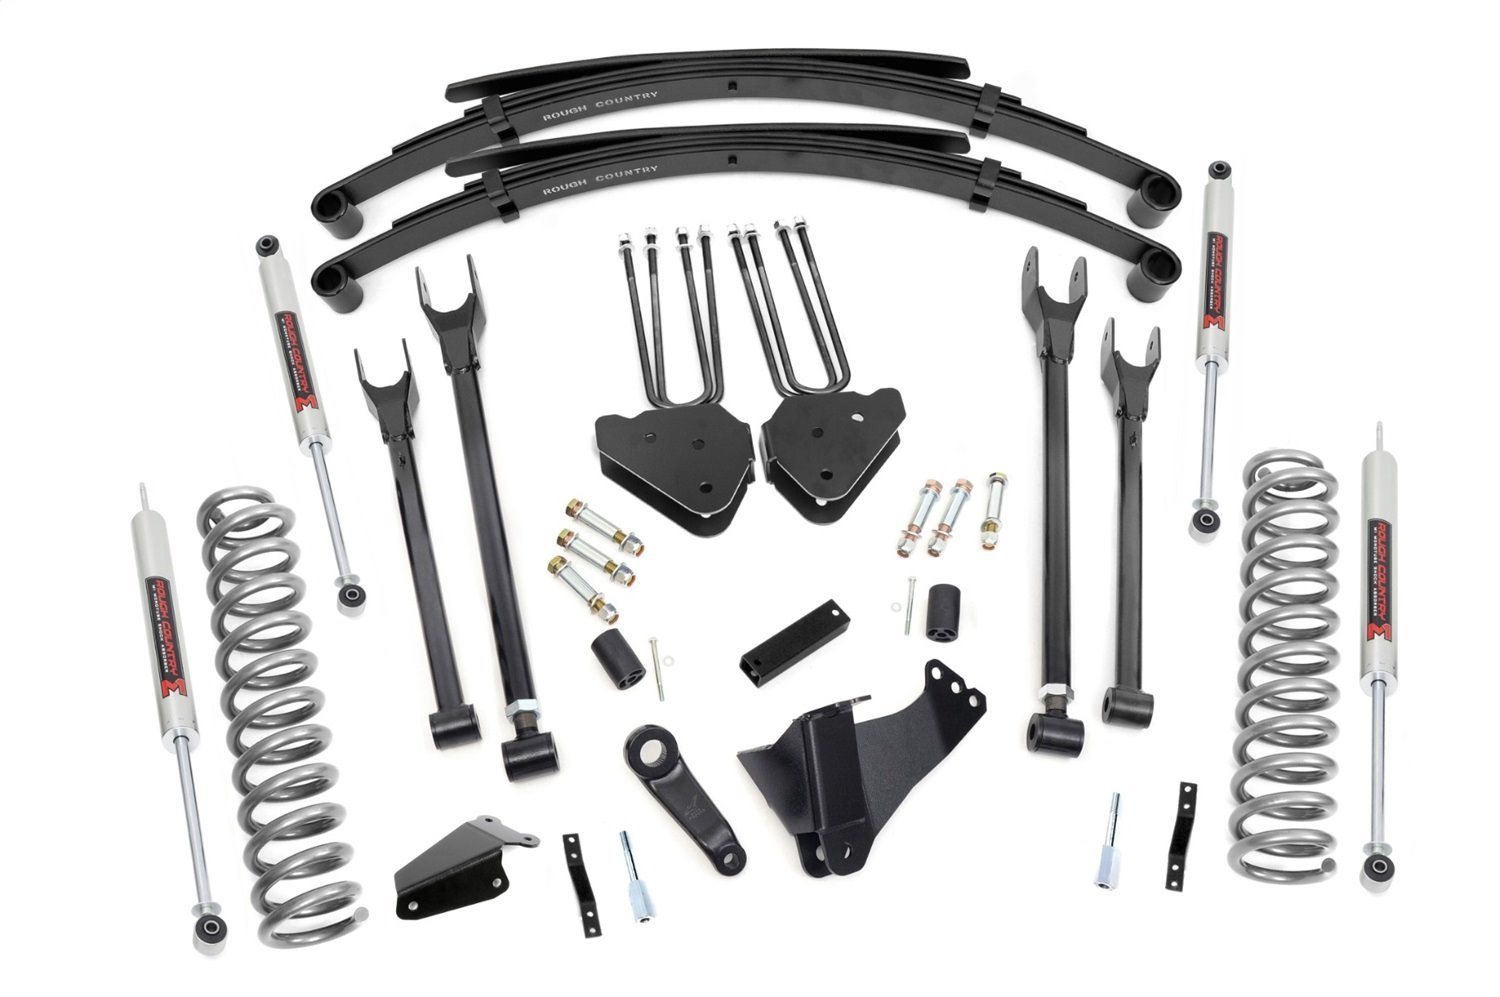 59040 8 in. Lift Kit, 4 Link, RR Springs, M1, Ford Super Duty (05-07)